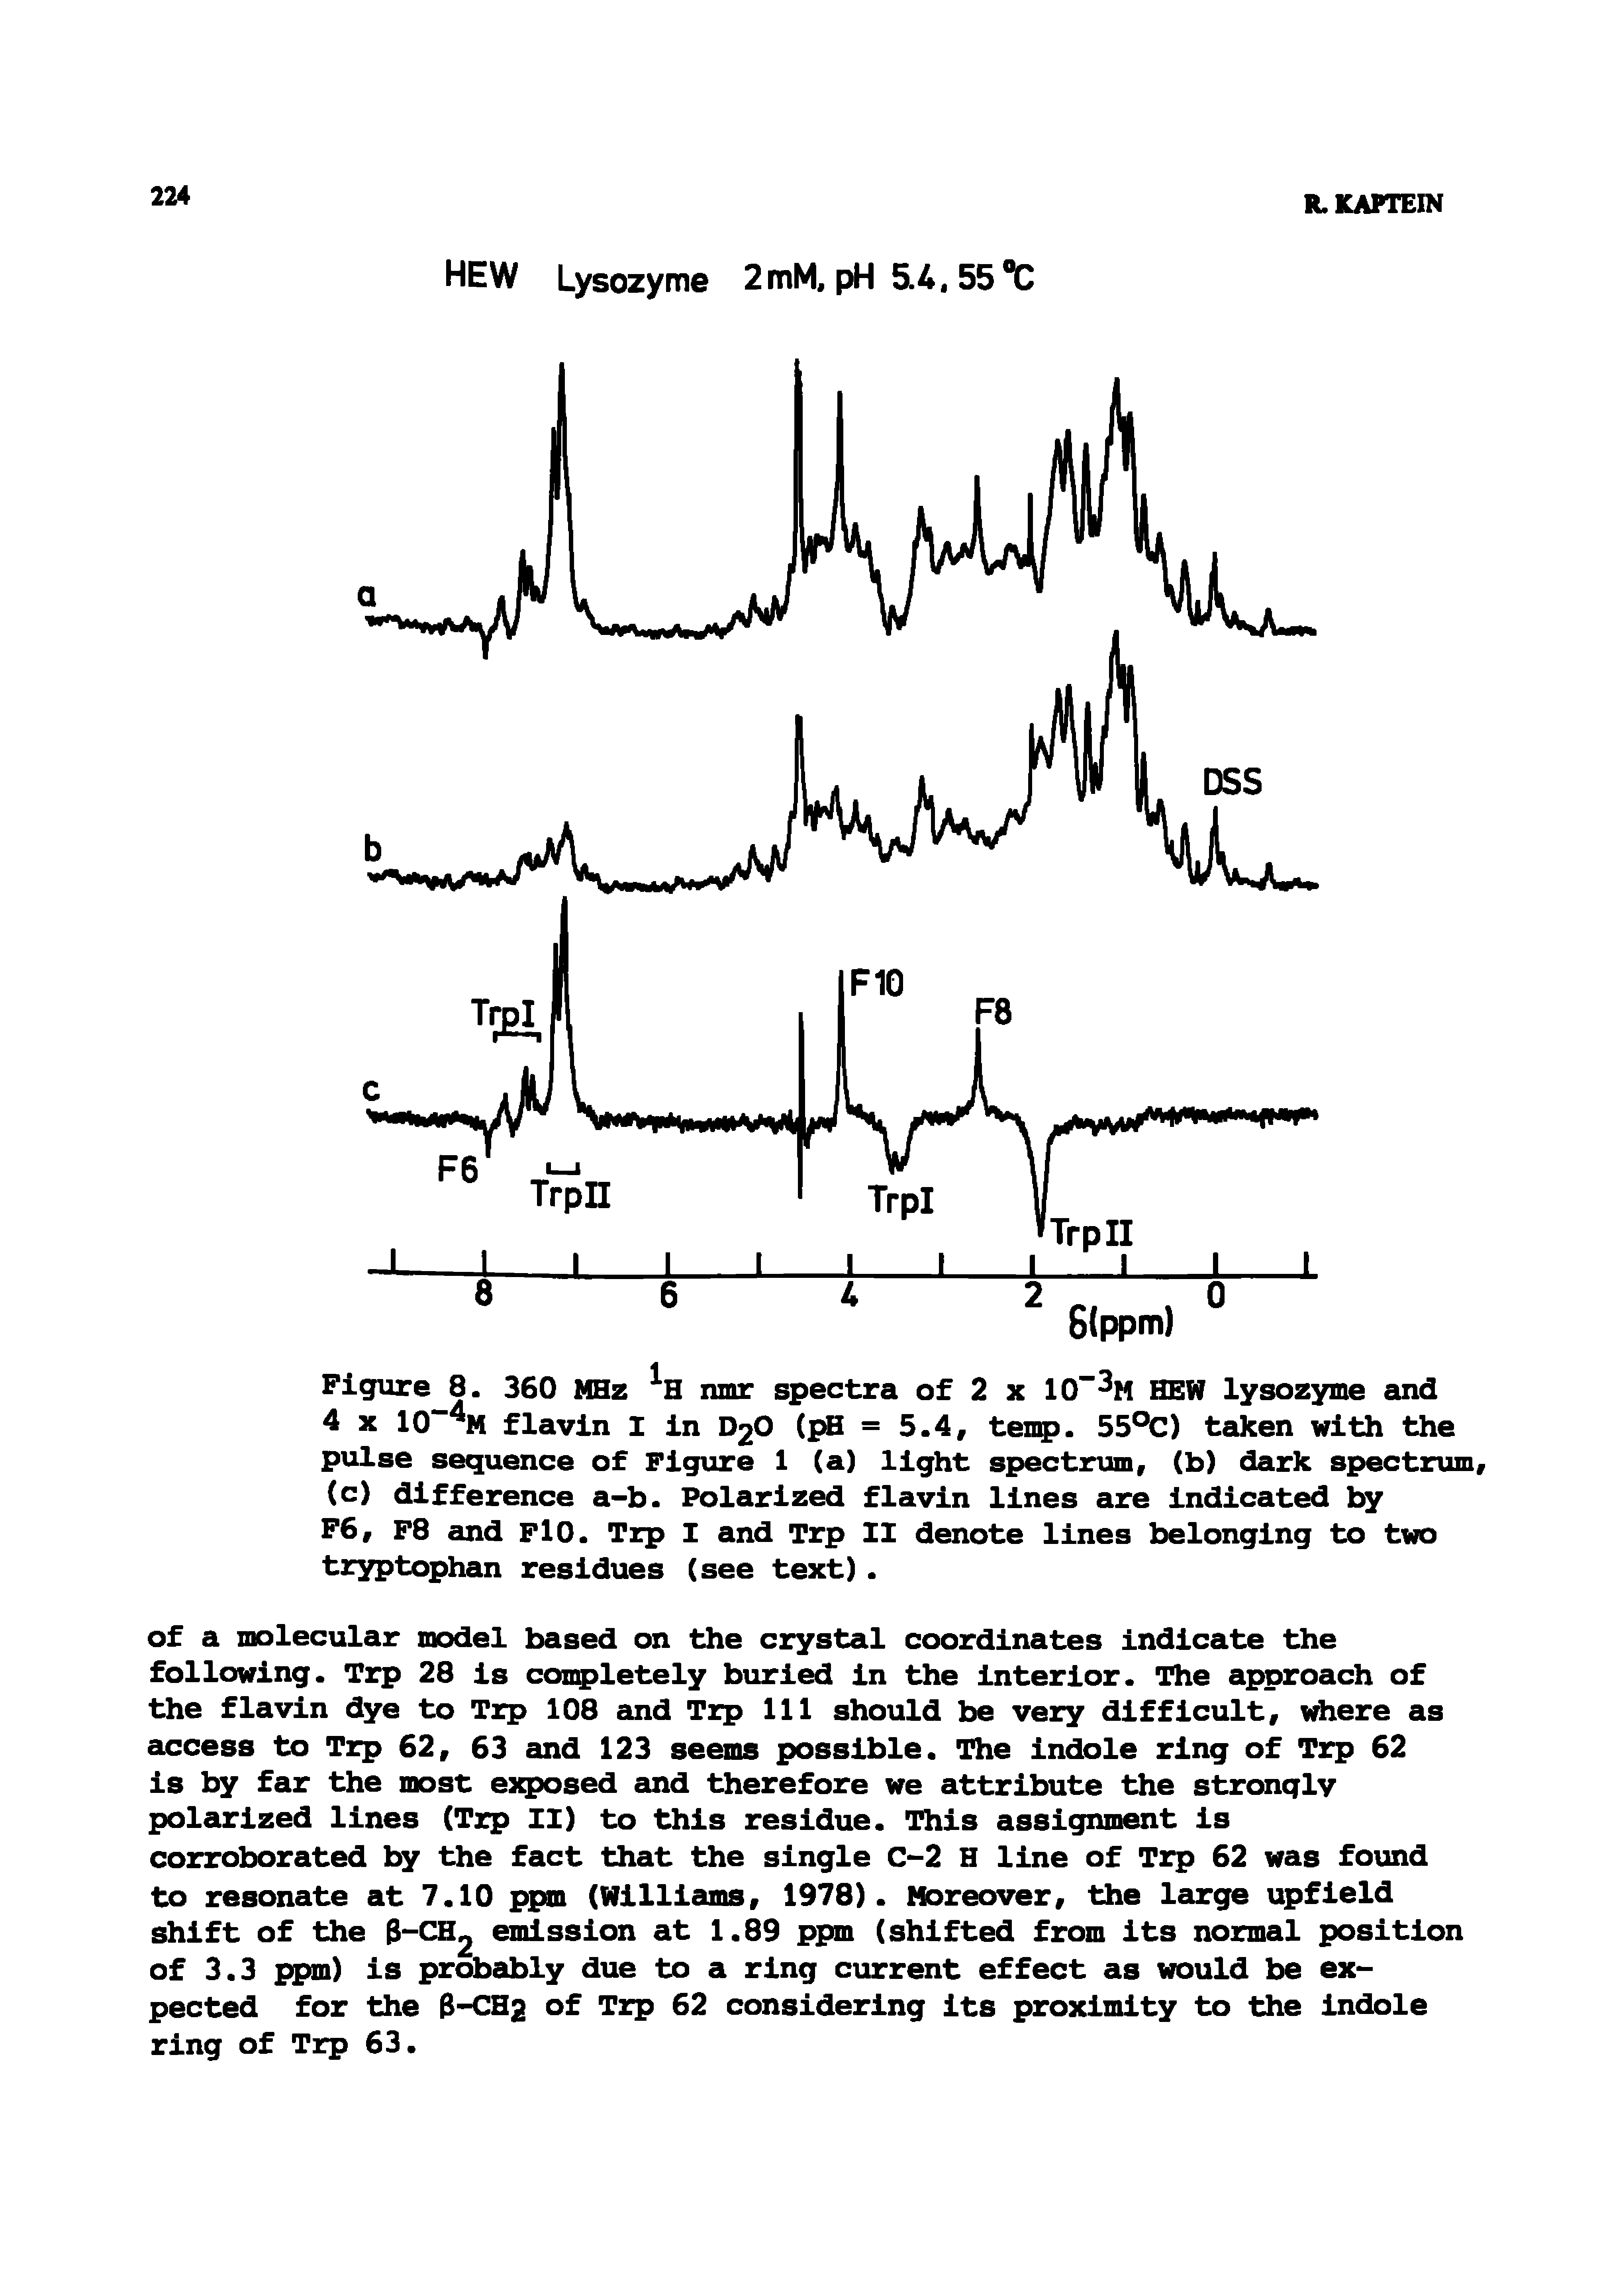 Figure 8. 360 MHz nmr spectra of 2 x 10 M HEW lysozyme and 4 X 10 M flavin I in D2O (pH = 5.4, temp. 55°C) taken with the pulse sequence of Figure 1 (a) light spectrum, (b) dark spectrum, (c) difference a-b. Polarized flavin lines are indicated by F6, F8 and FlO. Trp I and Trp II denote lines belonging to two tsryptophan residues (see text) ...